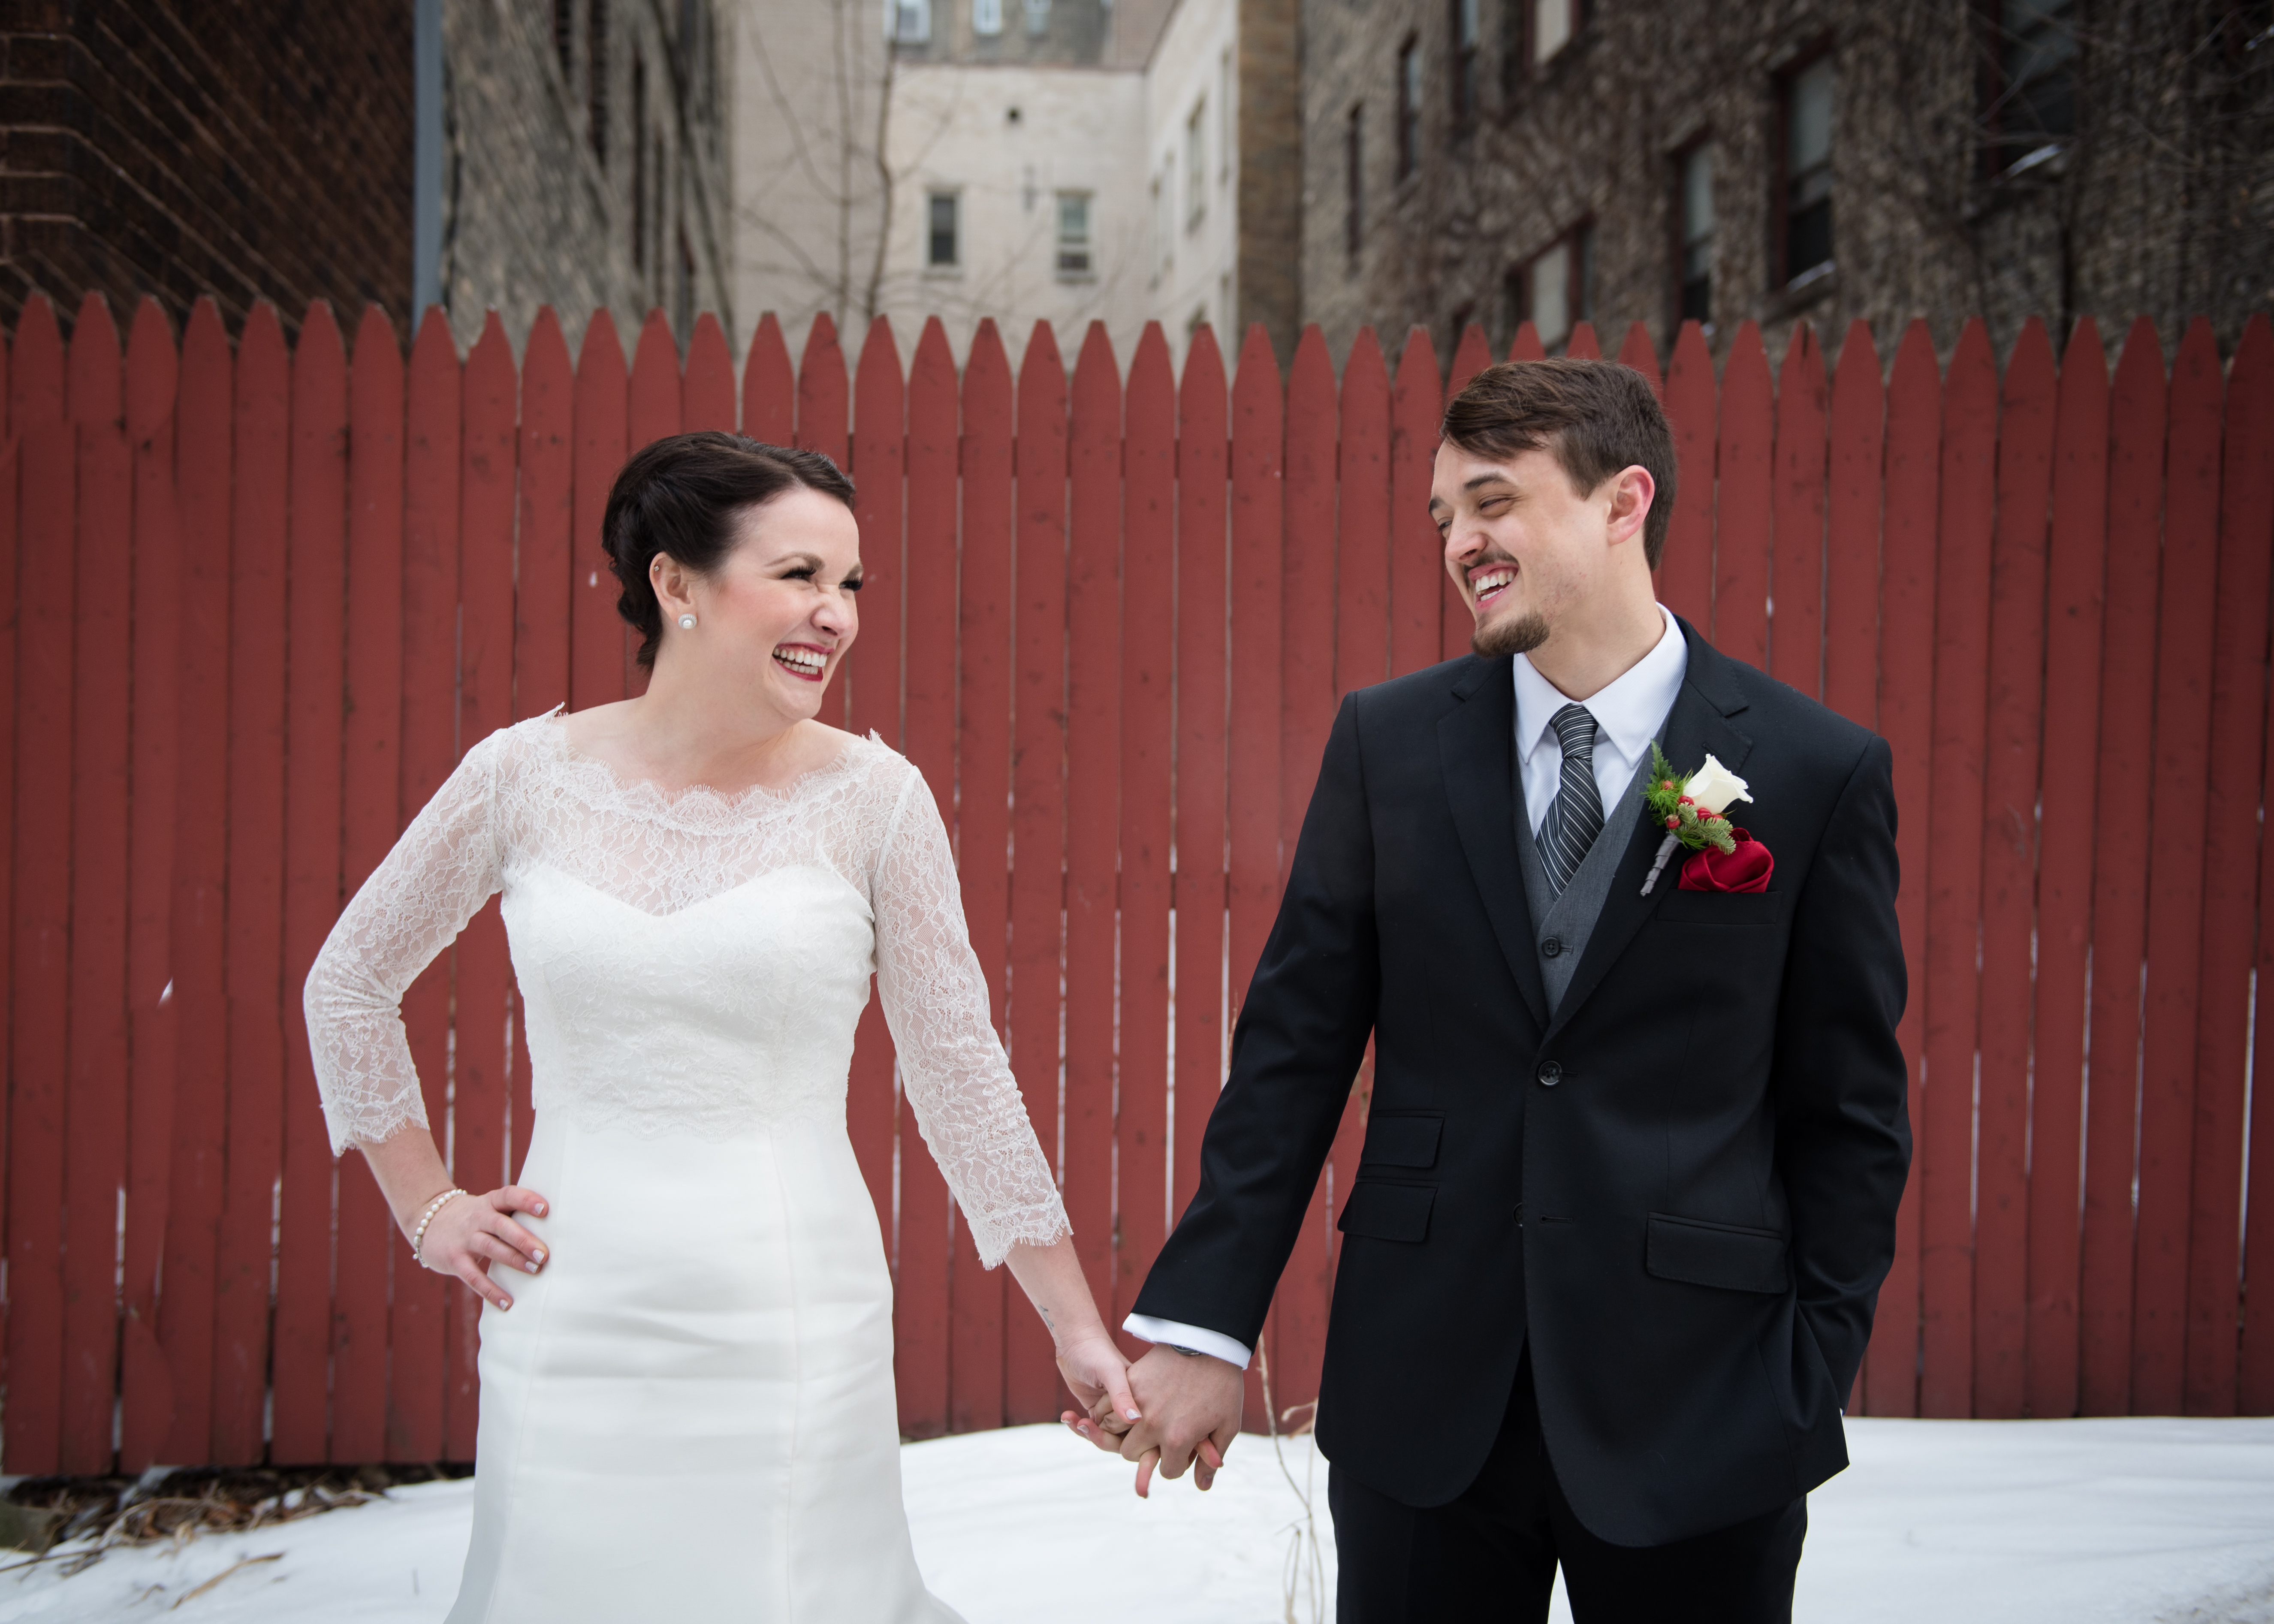 Izzi & Adam – Downtown Pabst Brewery Wedding Photography